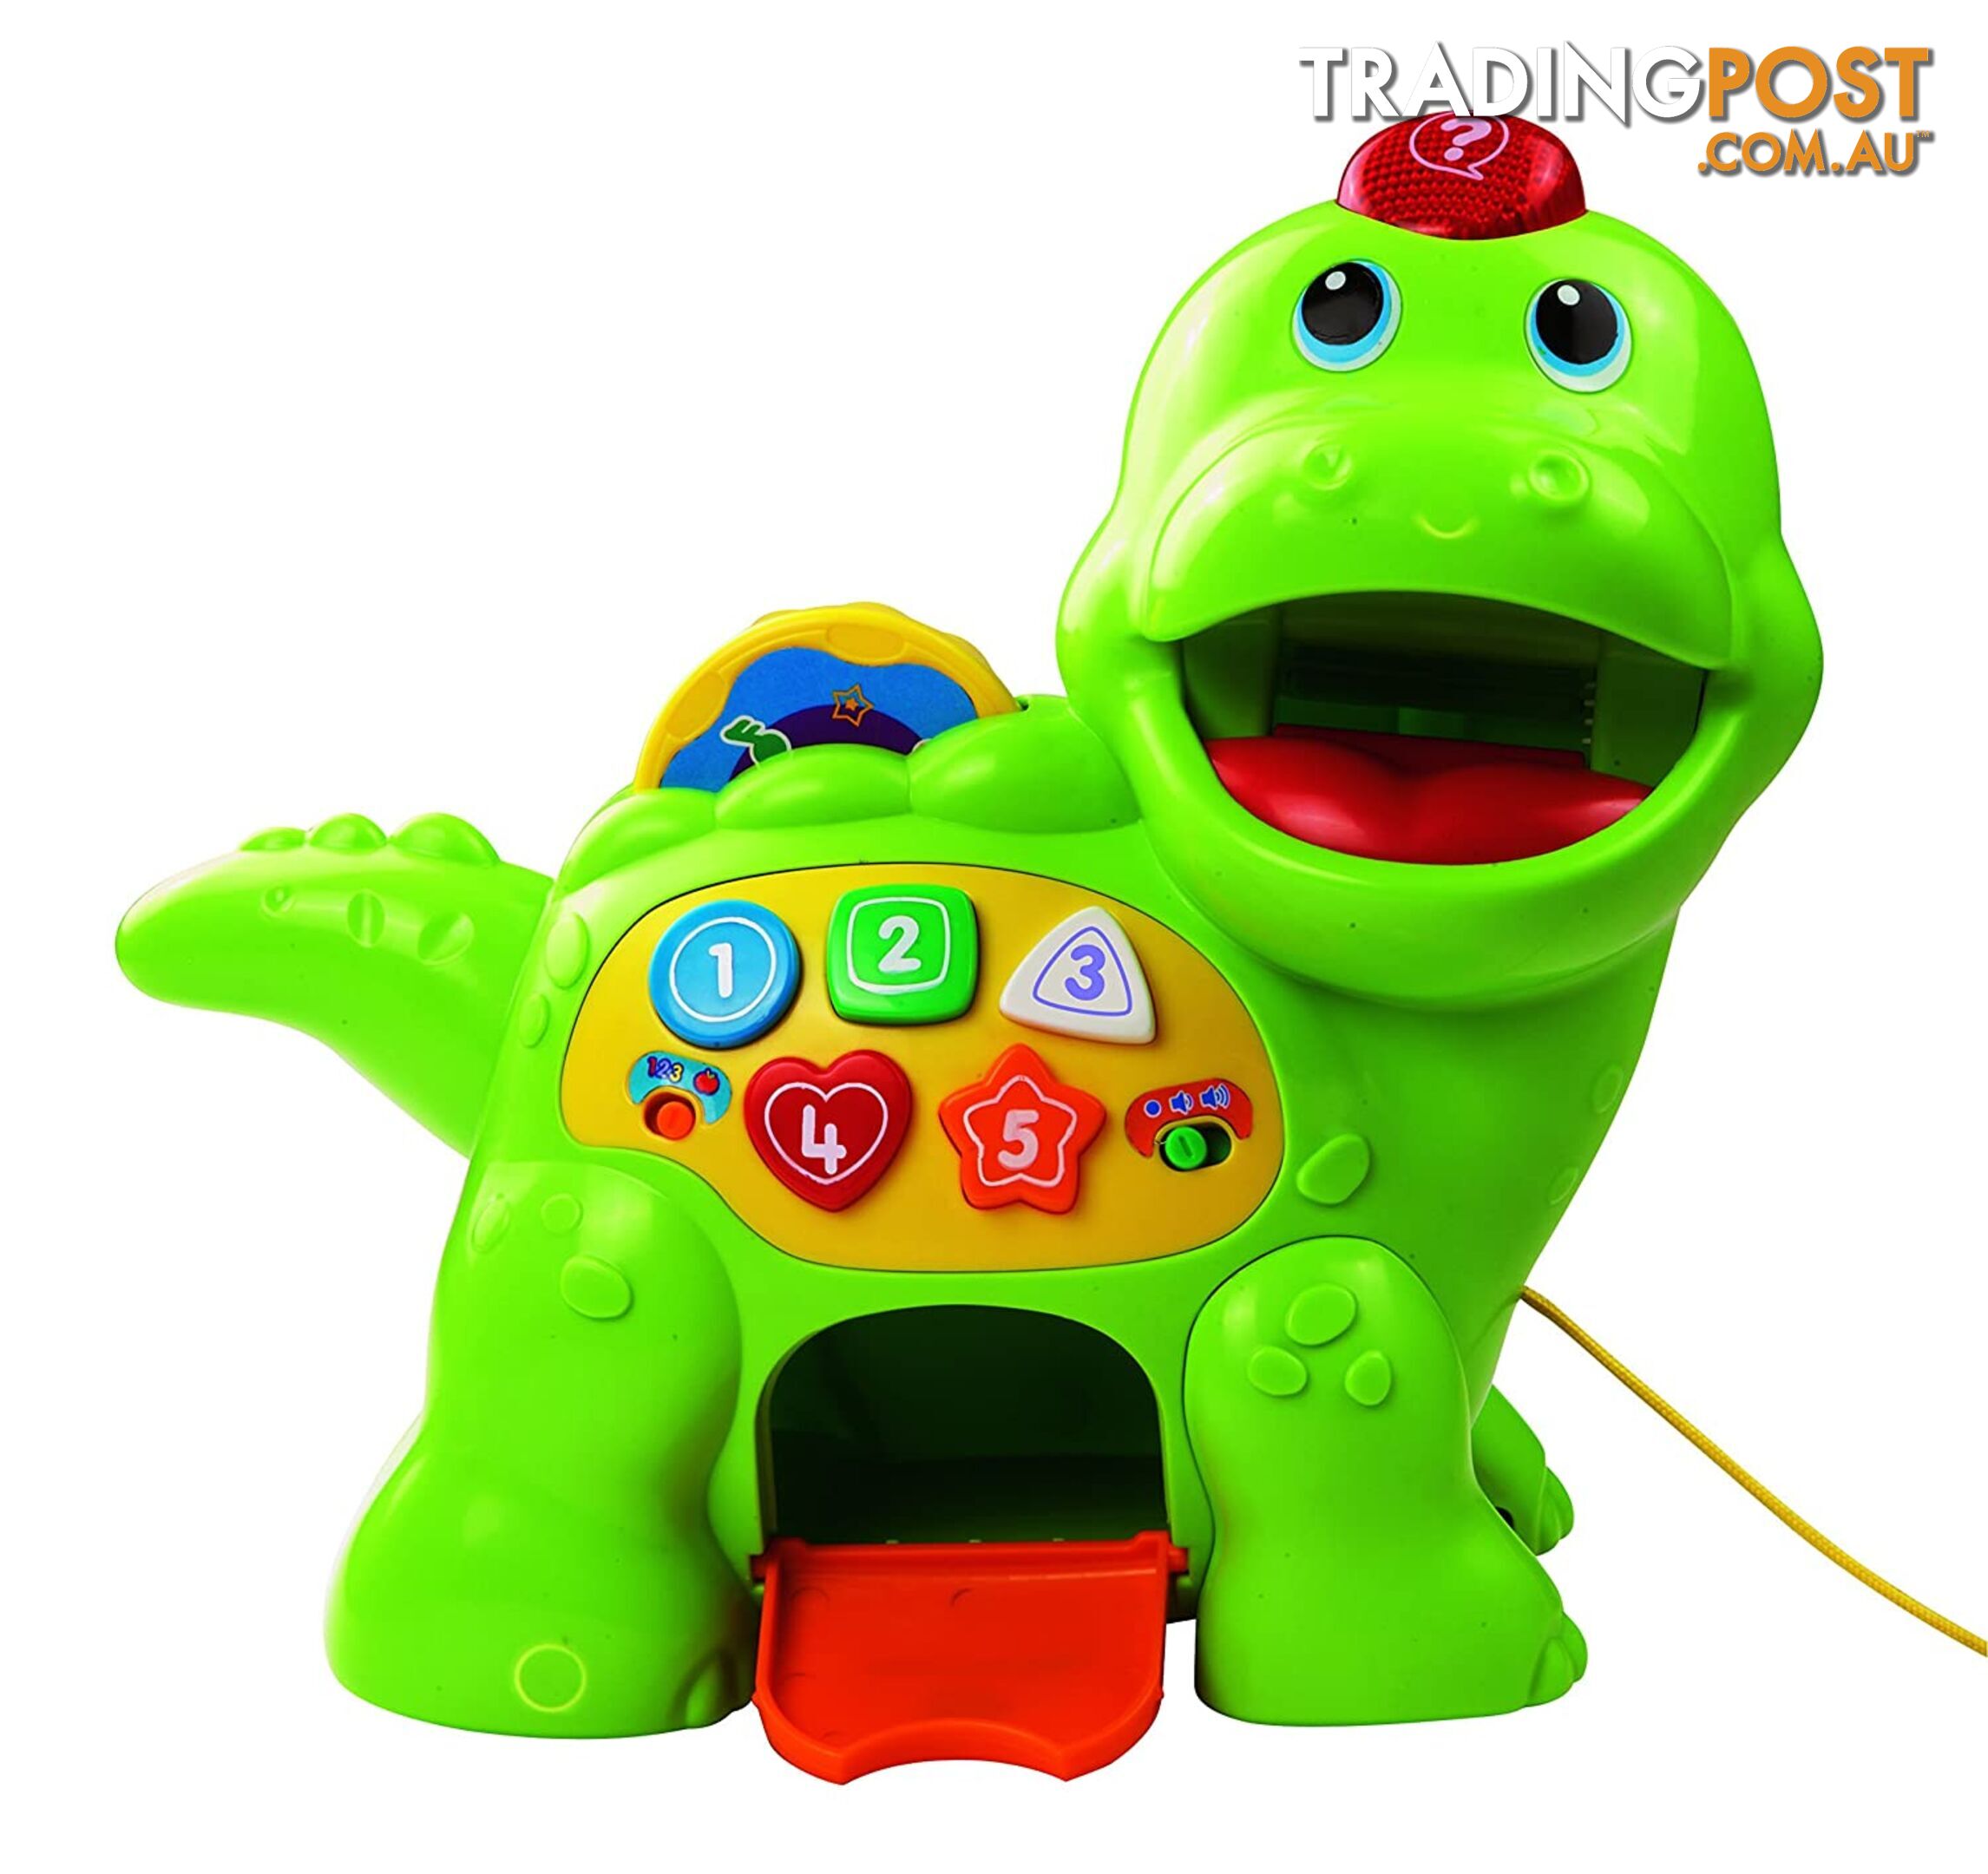 Vtech - Baby Feed Me Dino Musical Toy With Numbers Music Shapes And Interactive Lights Vtec Tn80157703004 - 3417761577035